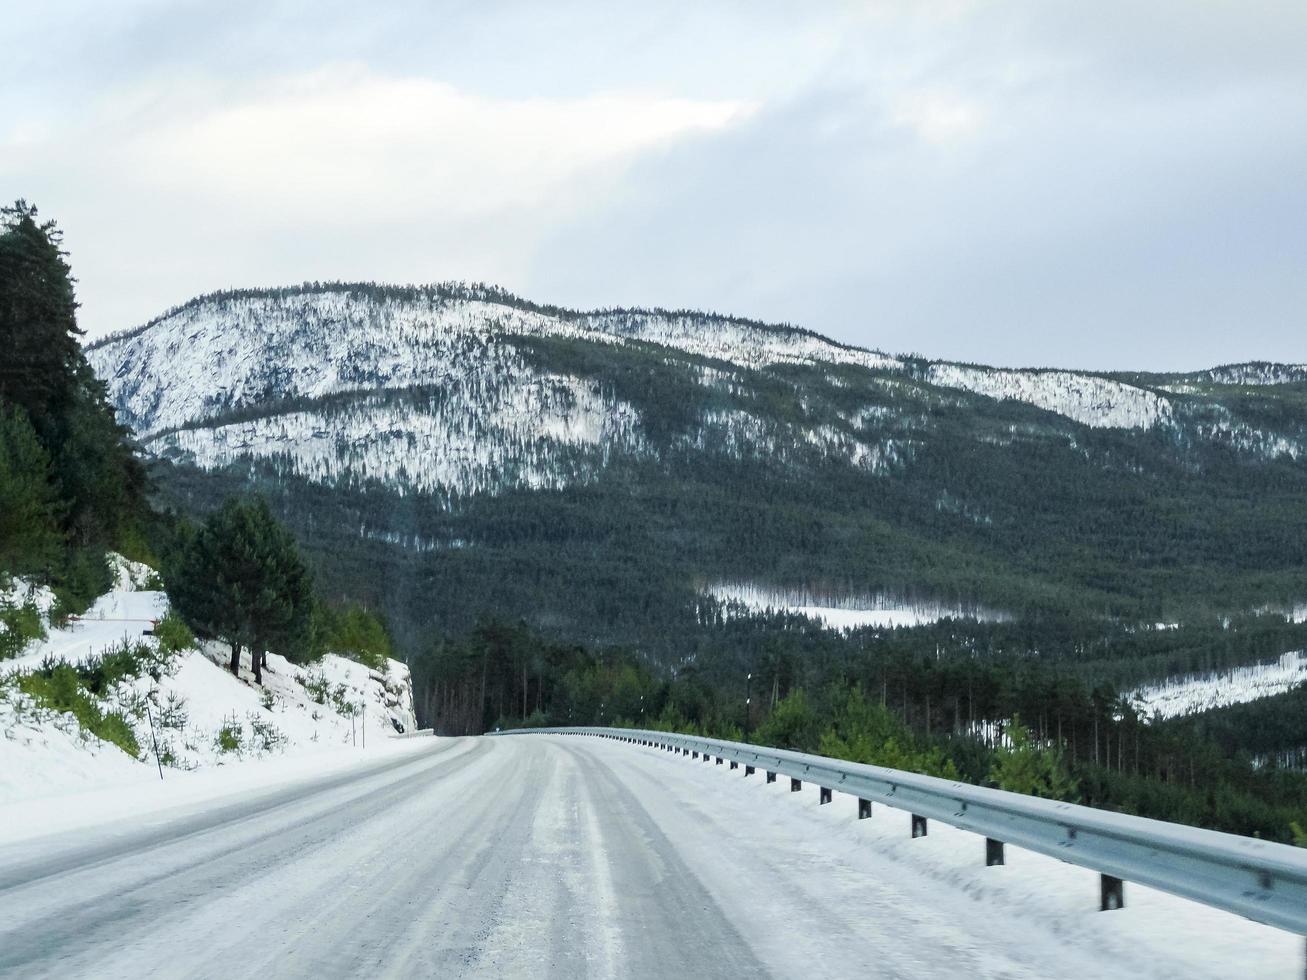 Driving through snowy white road and landscape in Norway. photo